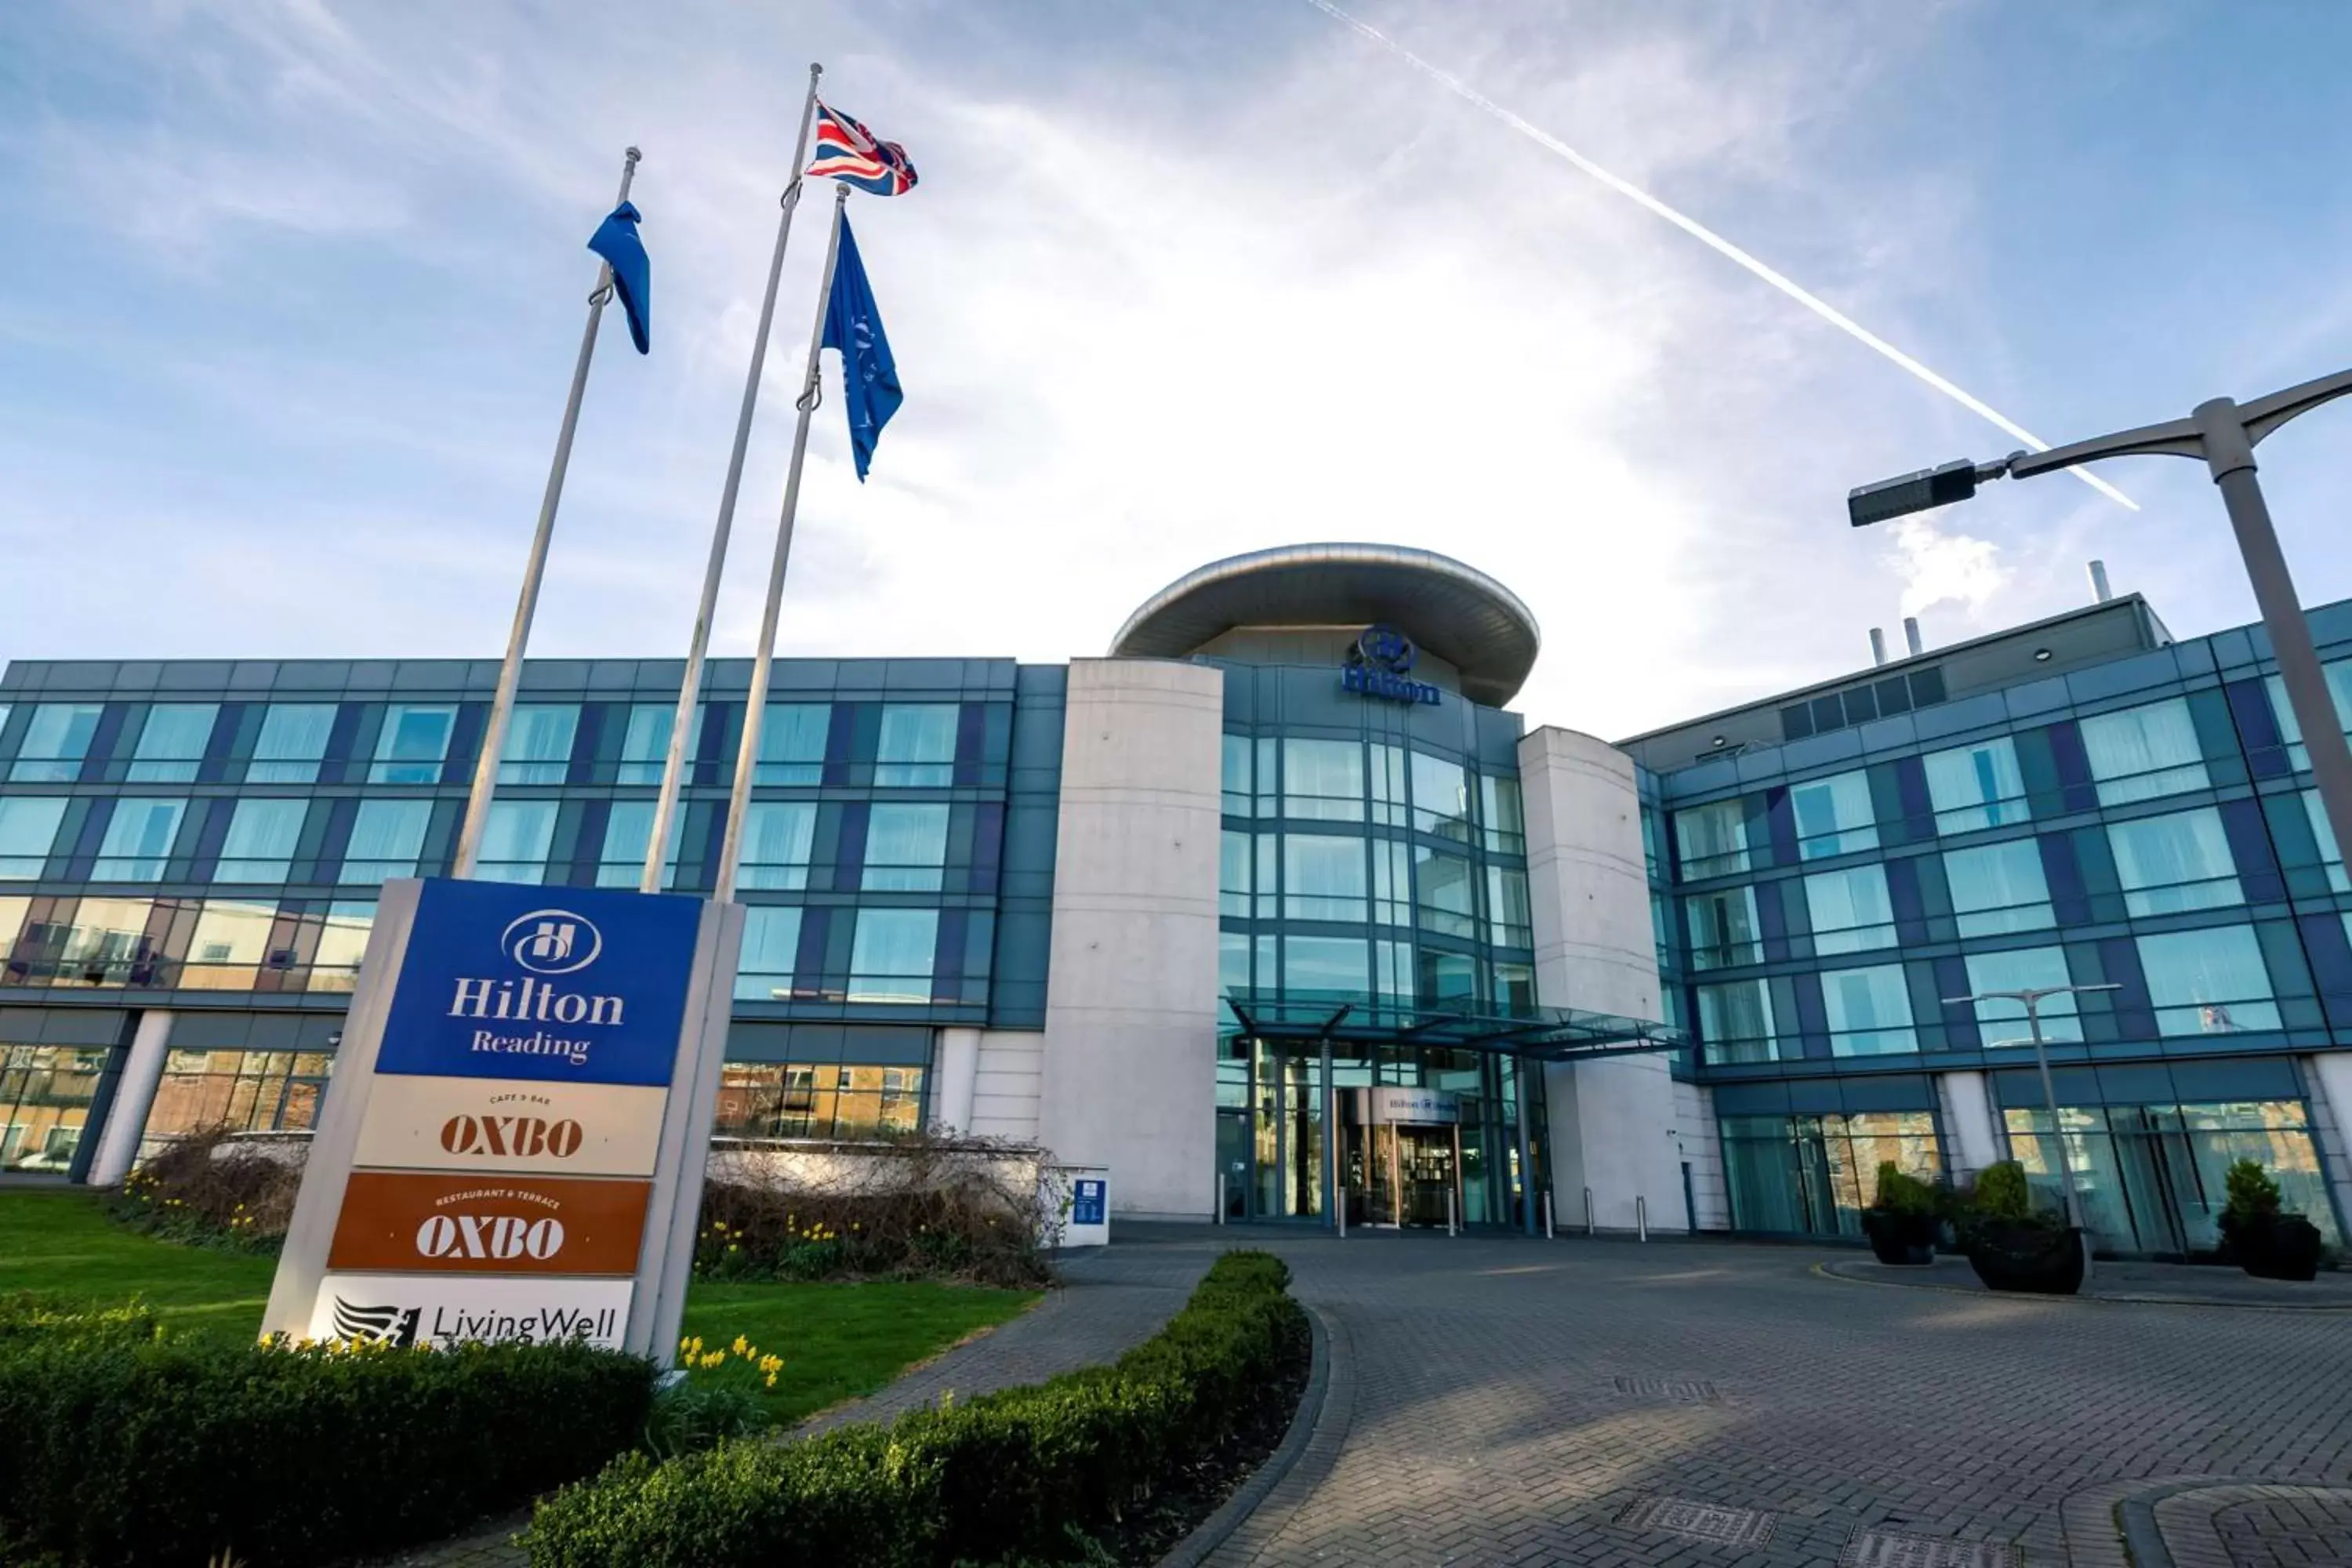 Property Building in Hilton Reading